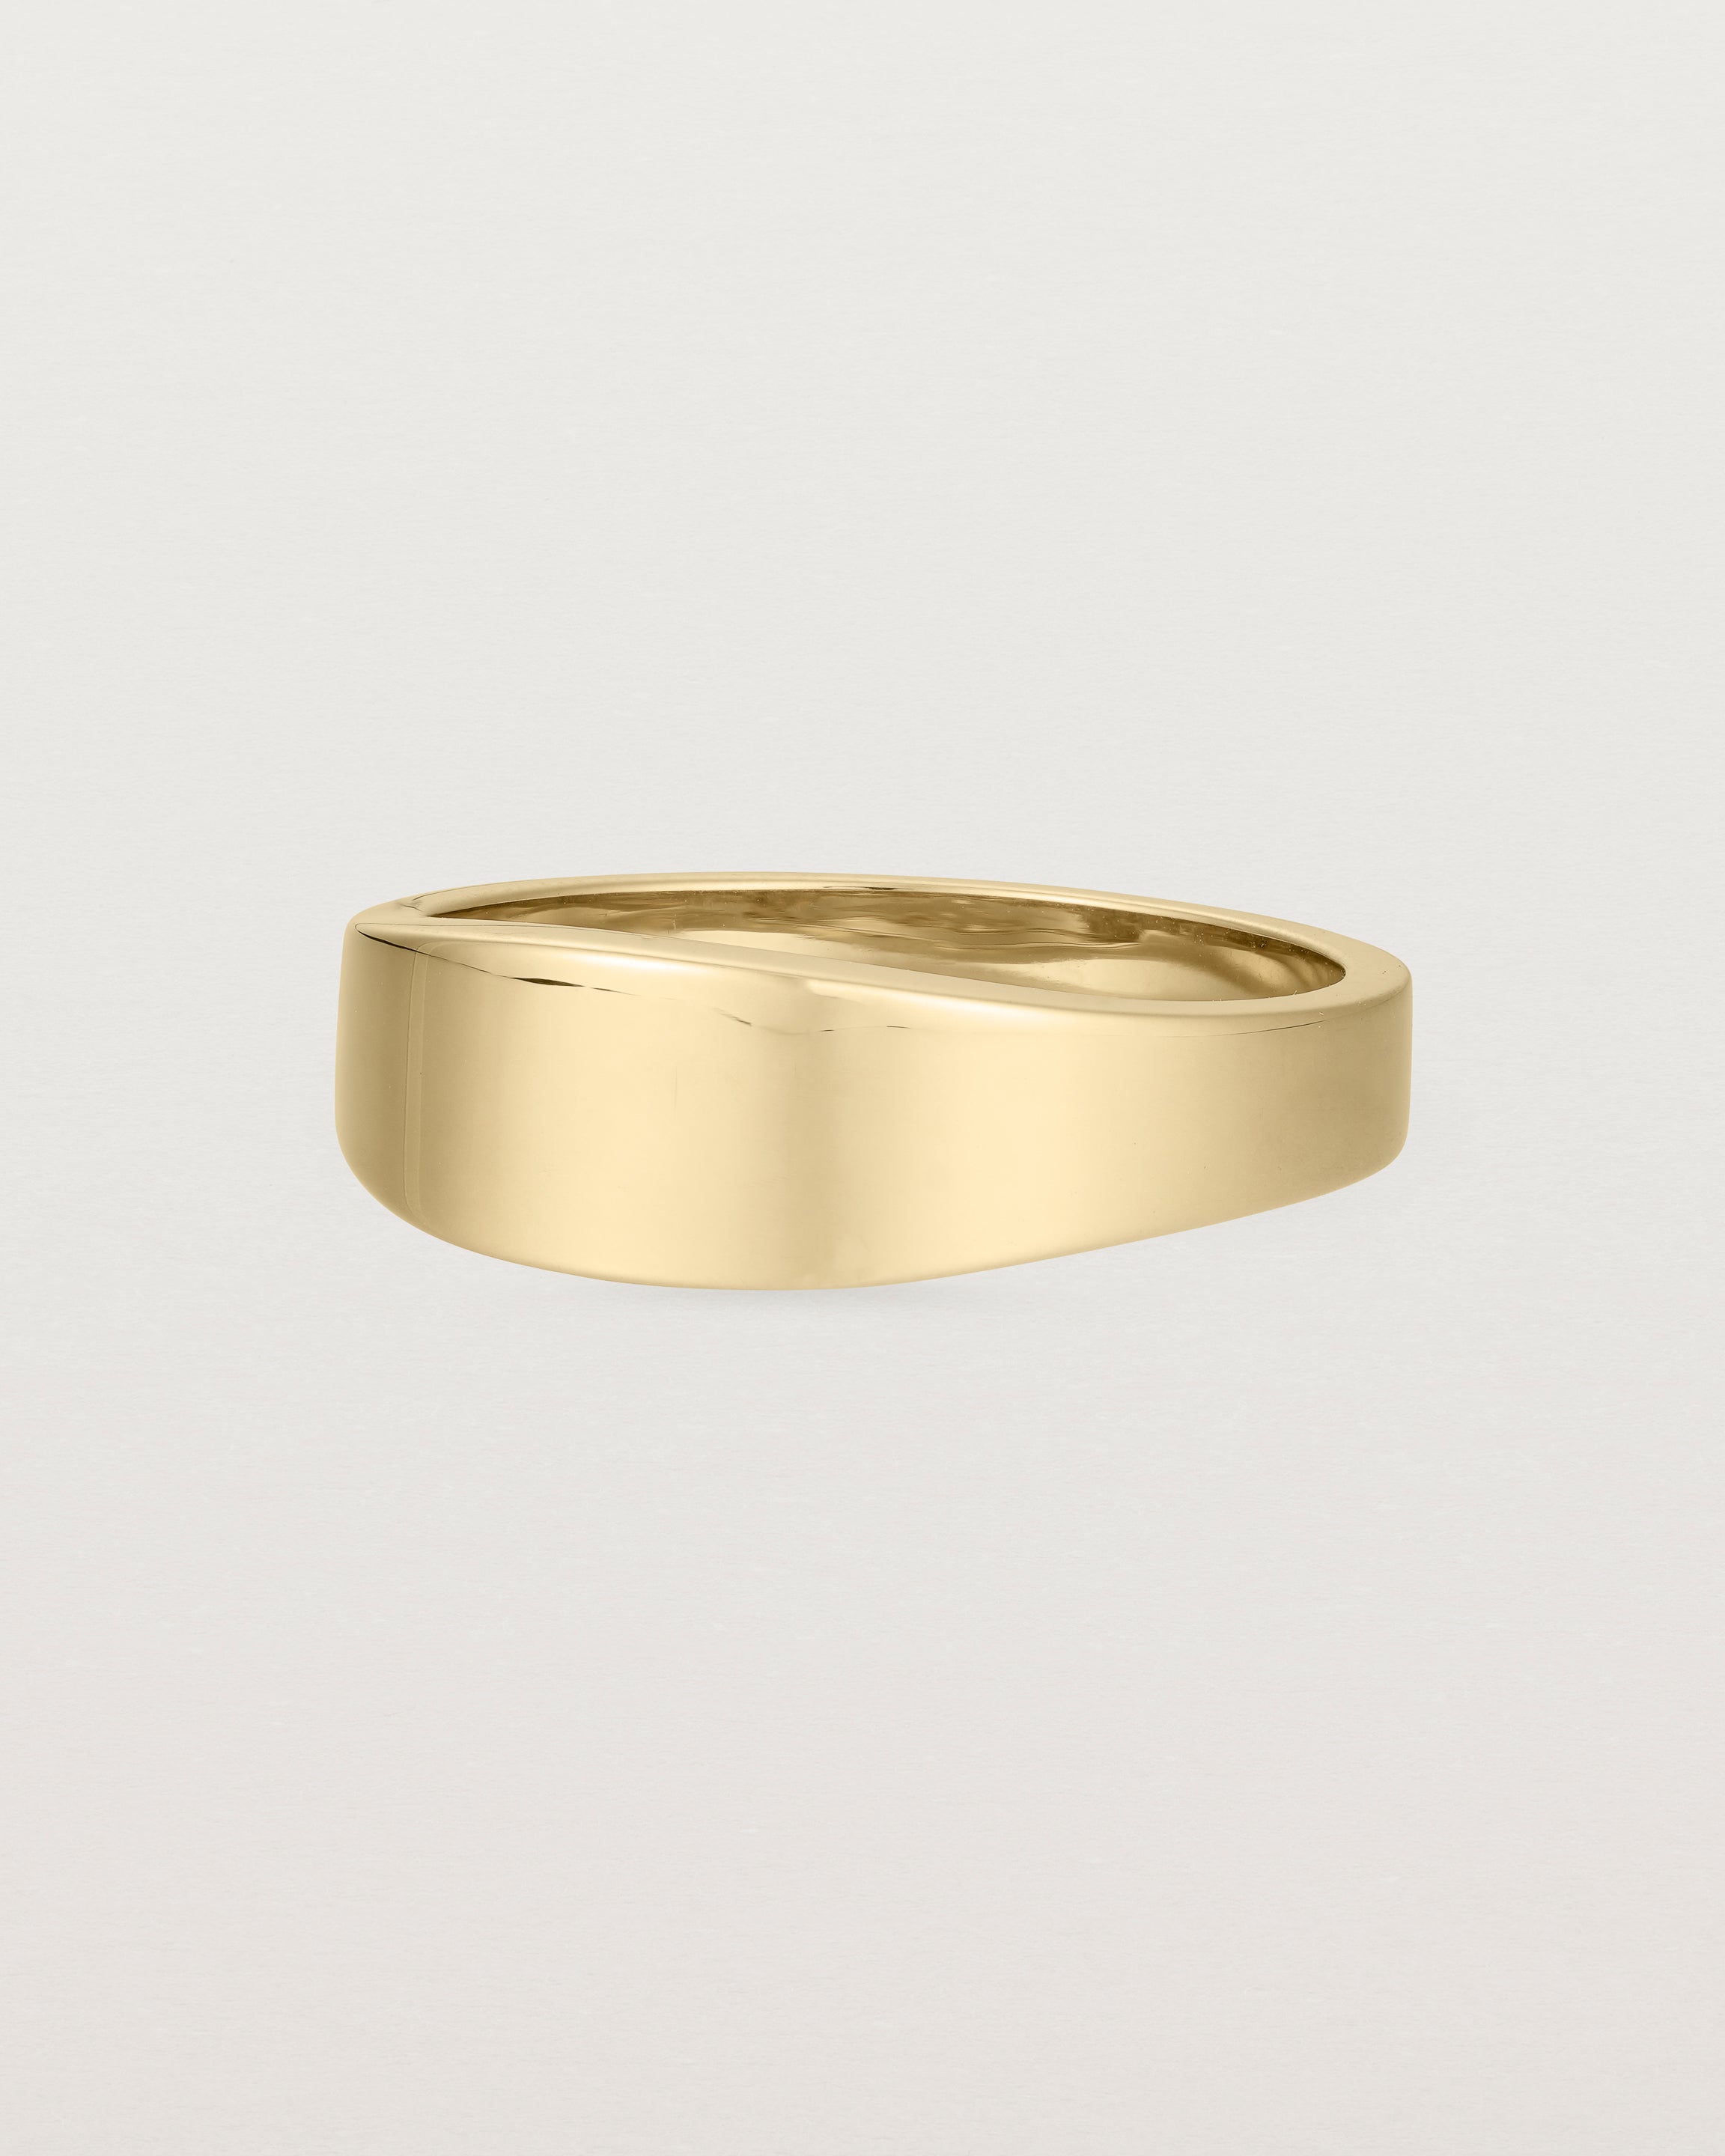 Angled view of the Amos Ring in Yellow Gold.